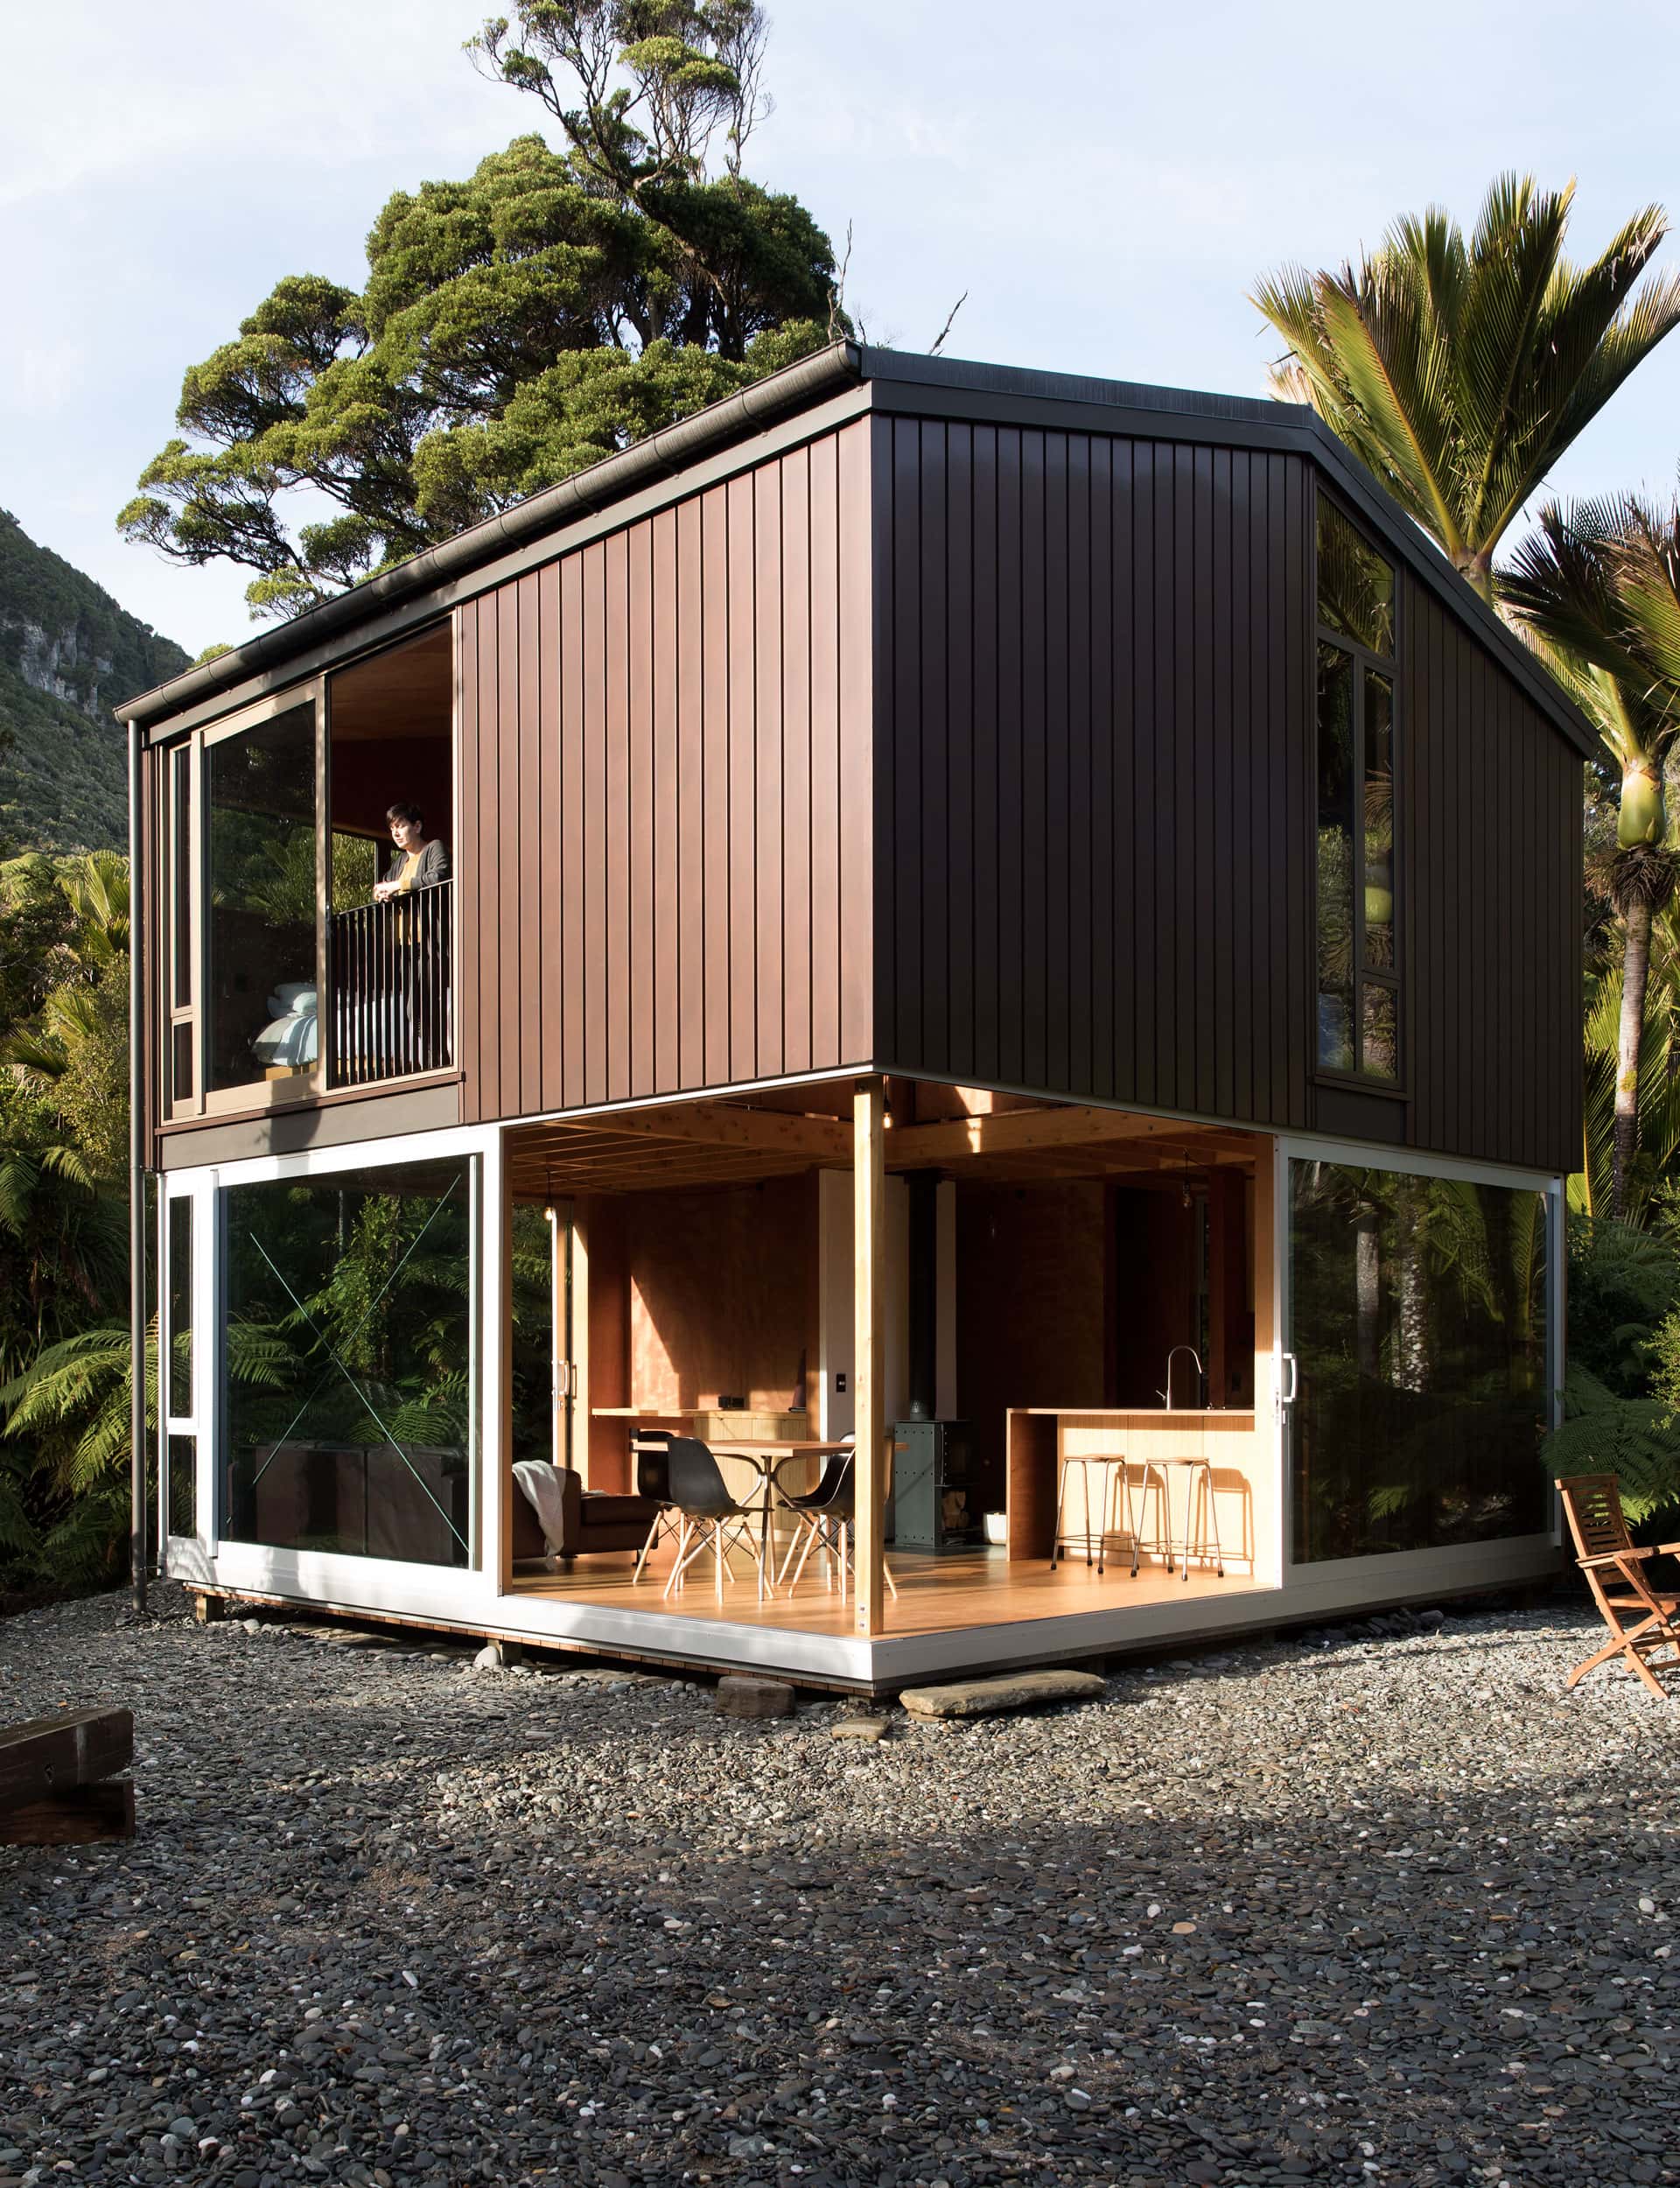 This tiny 36-square-metre home has the most inspiring design